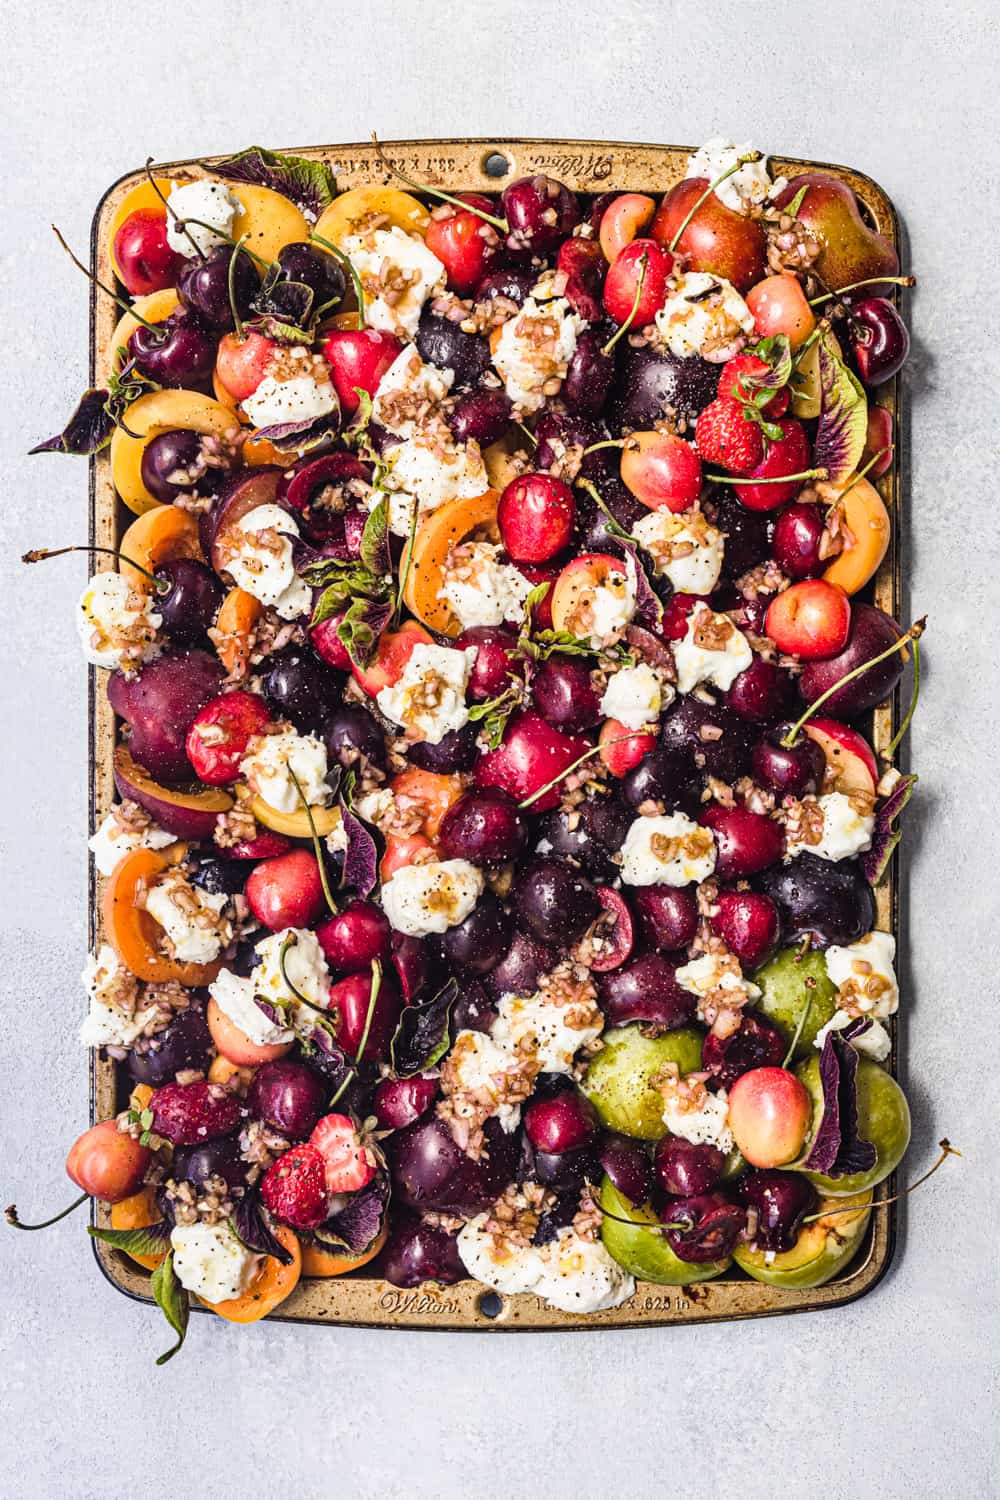 peaches, cherries, plums, apricots and nectarines with burrata, basil and vinaigrette arranged on a tray, overhead shot on a light background.